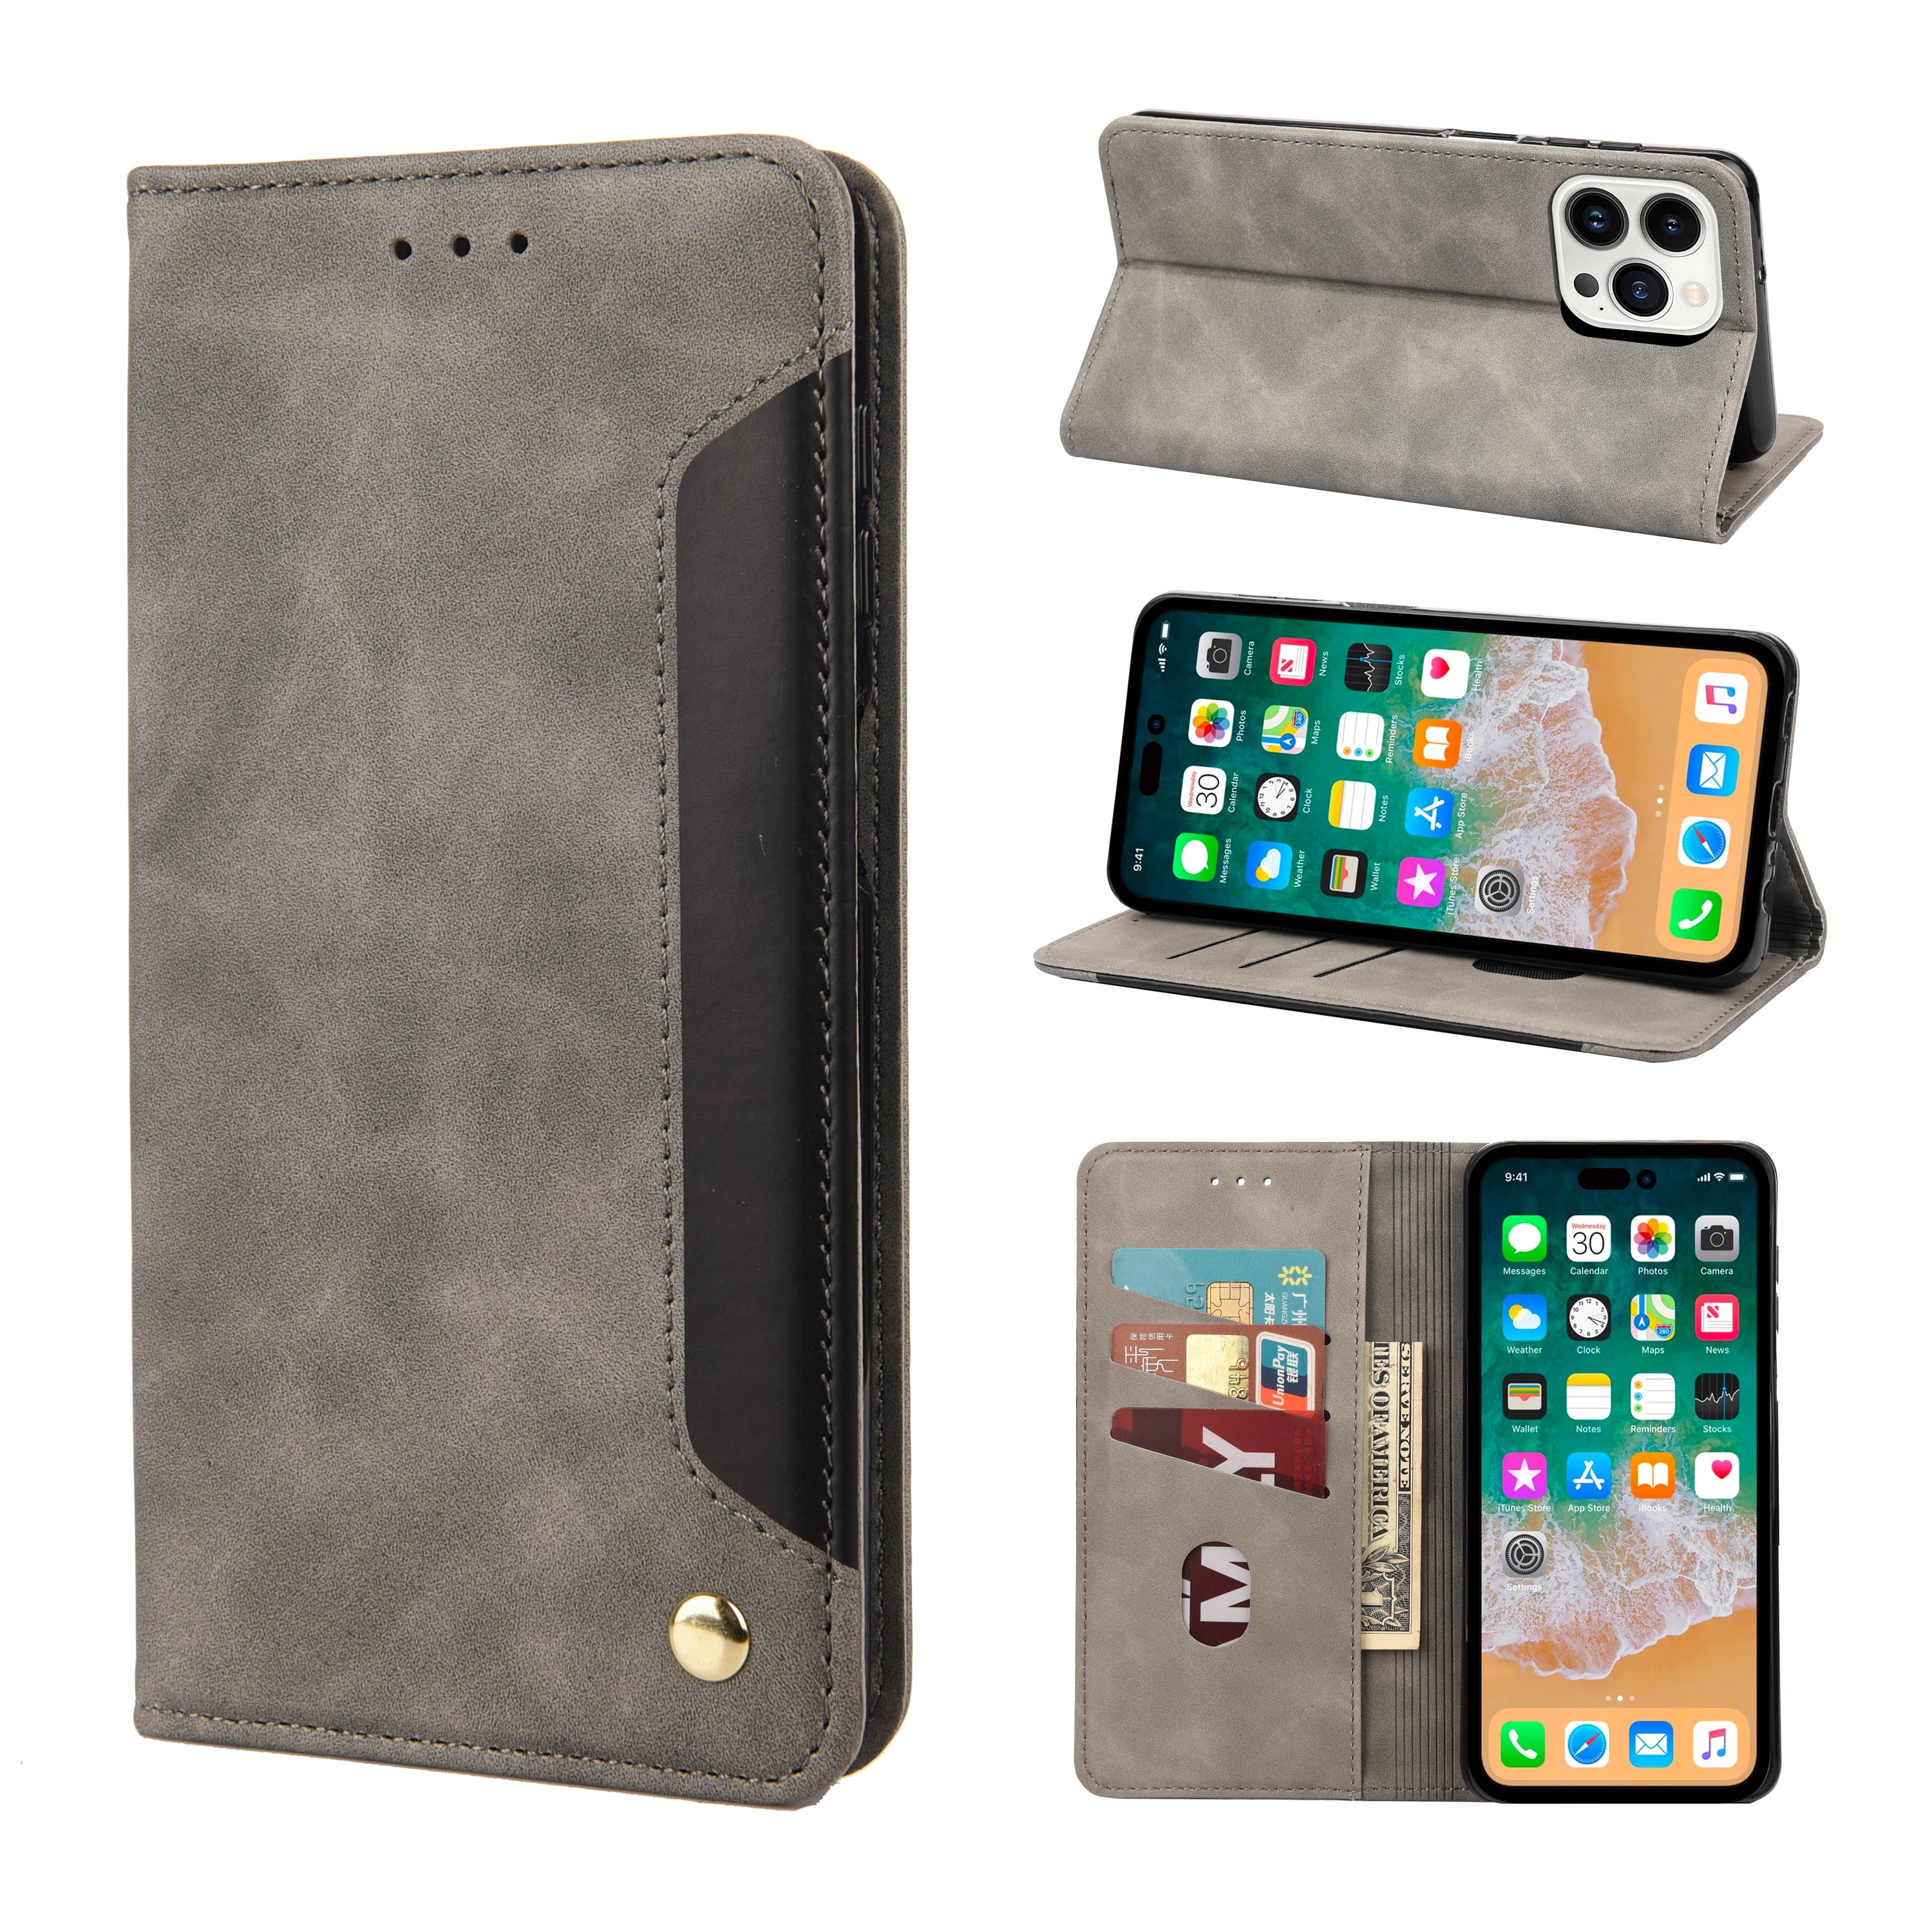 Feishell Slim Wallet Phone Case for iPhone 12 Pro Max 6.7 inch